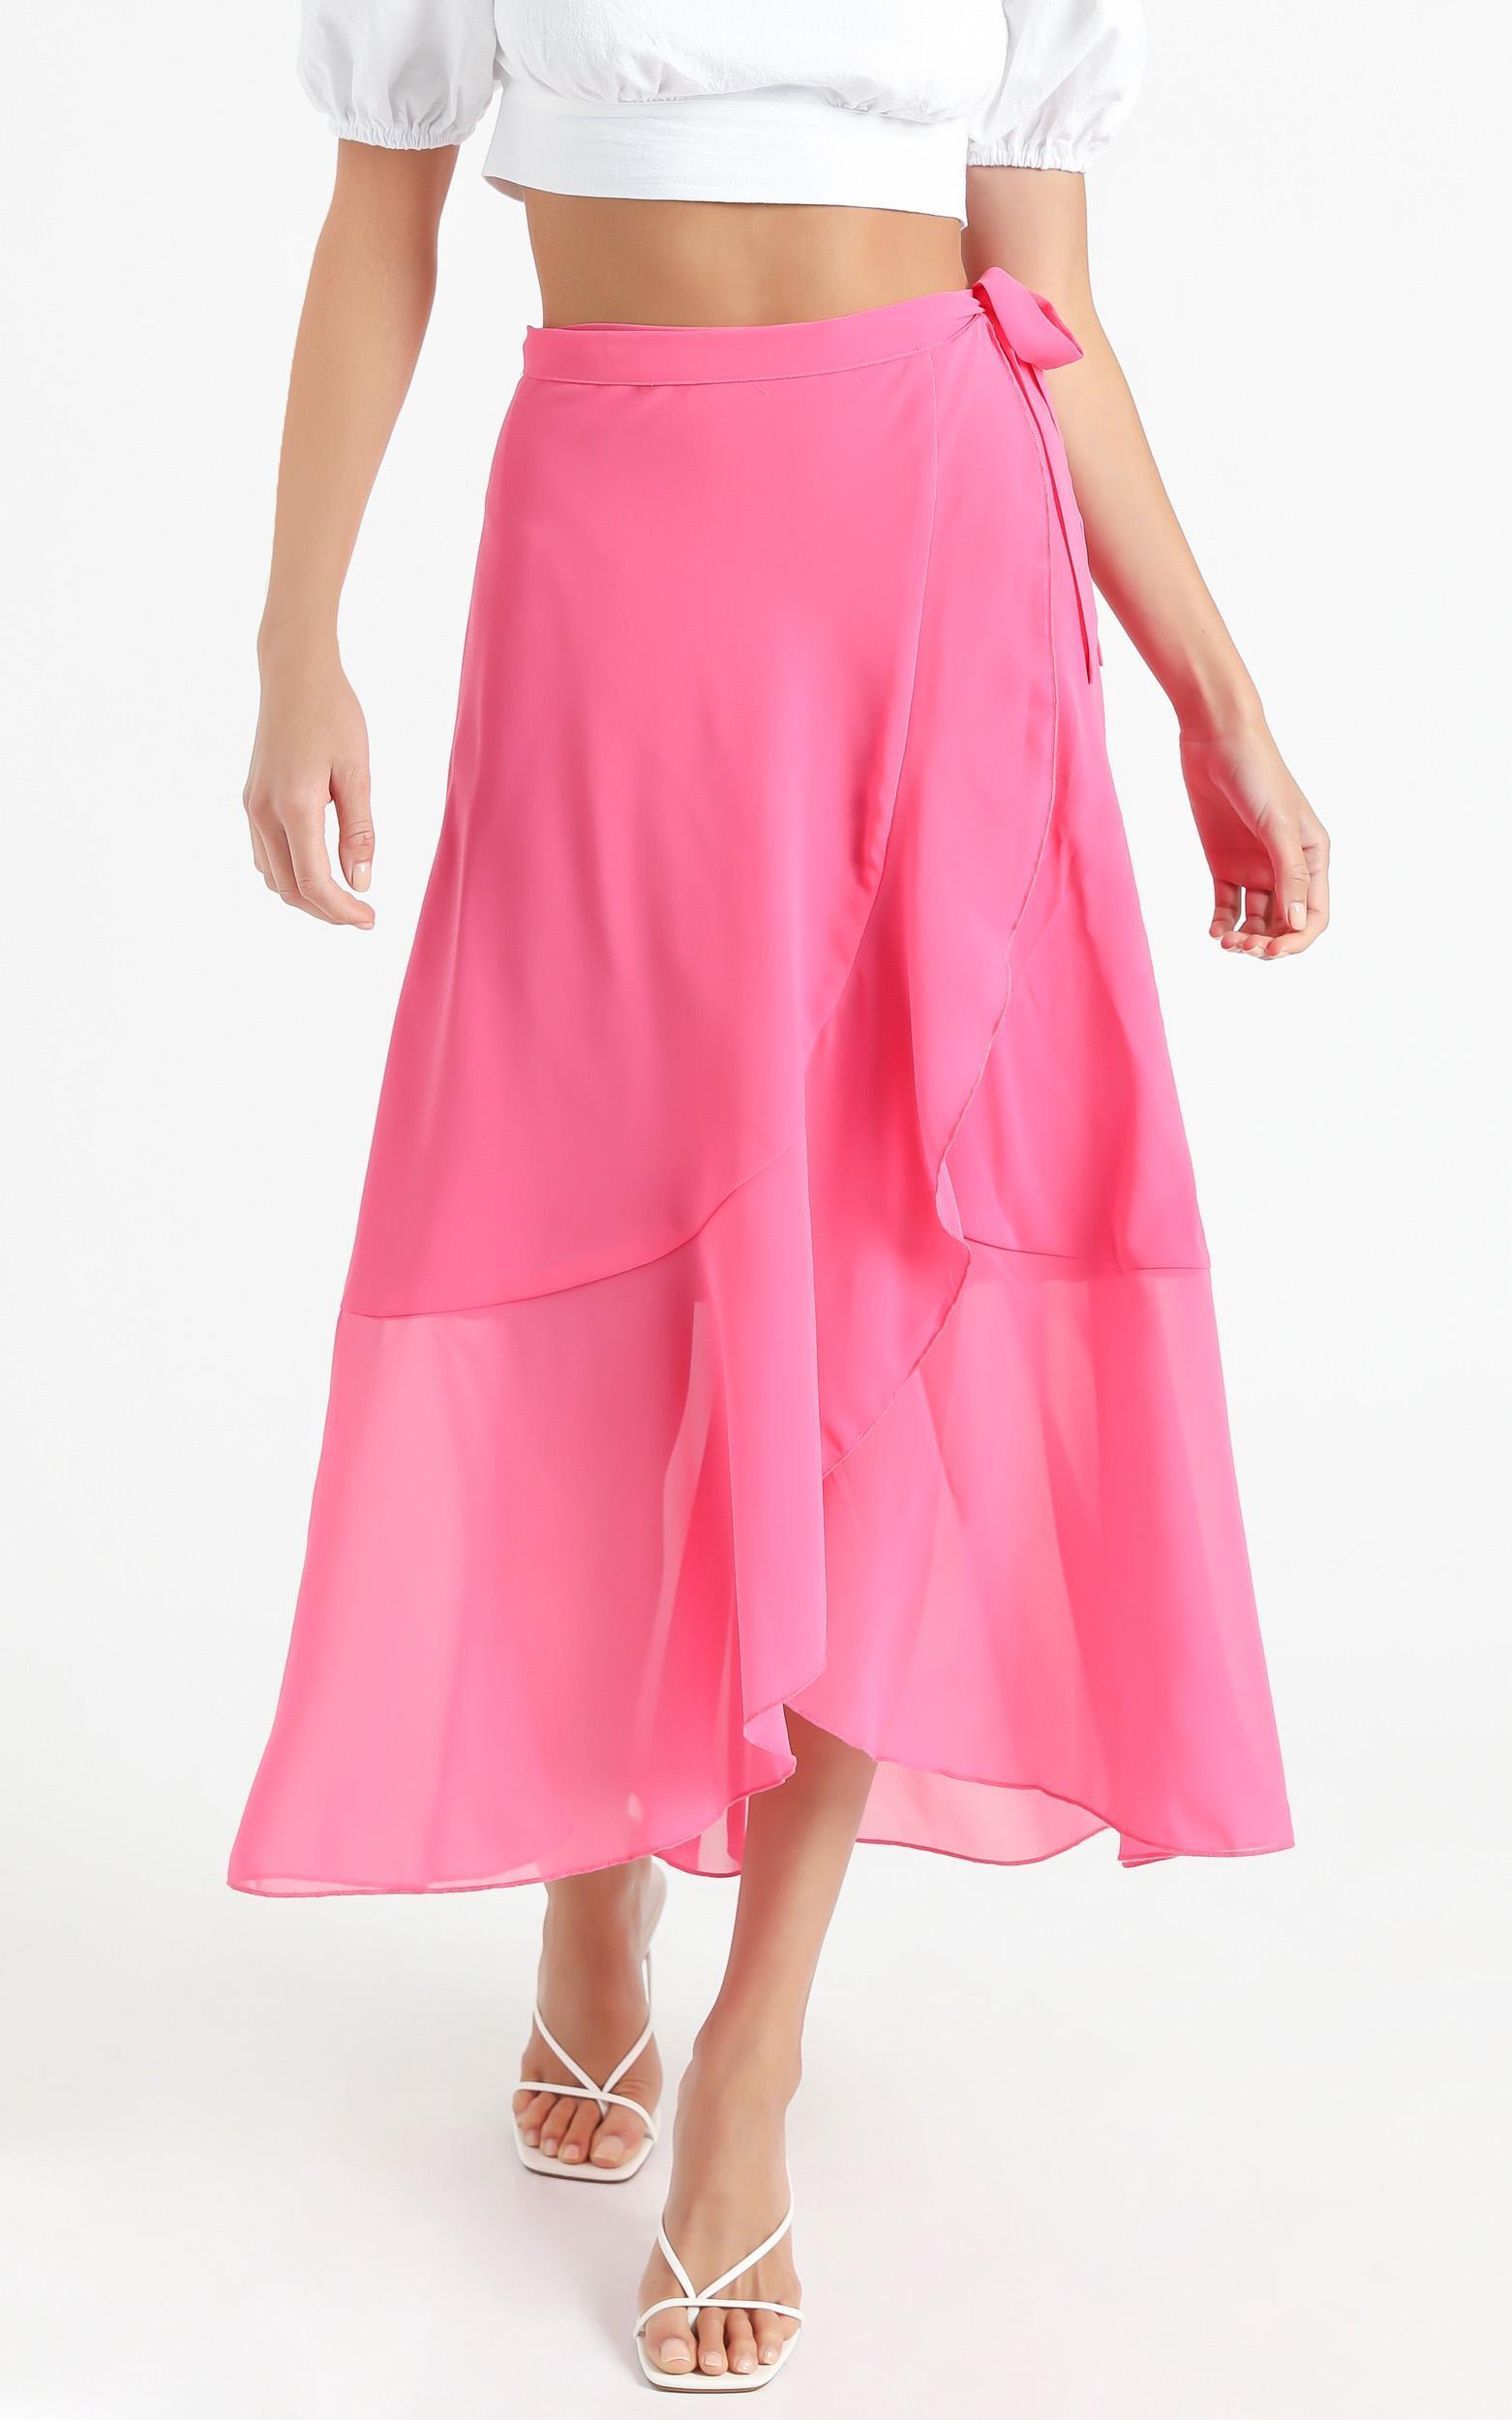 Add To The Mix Skirt in Hot Pink | Showpo